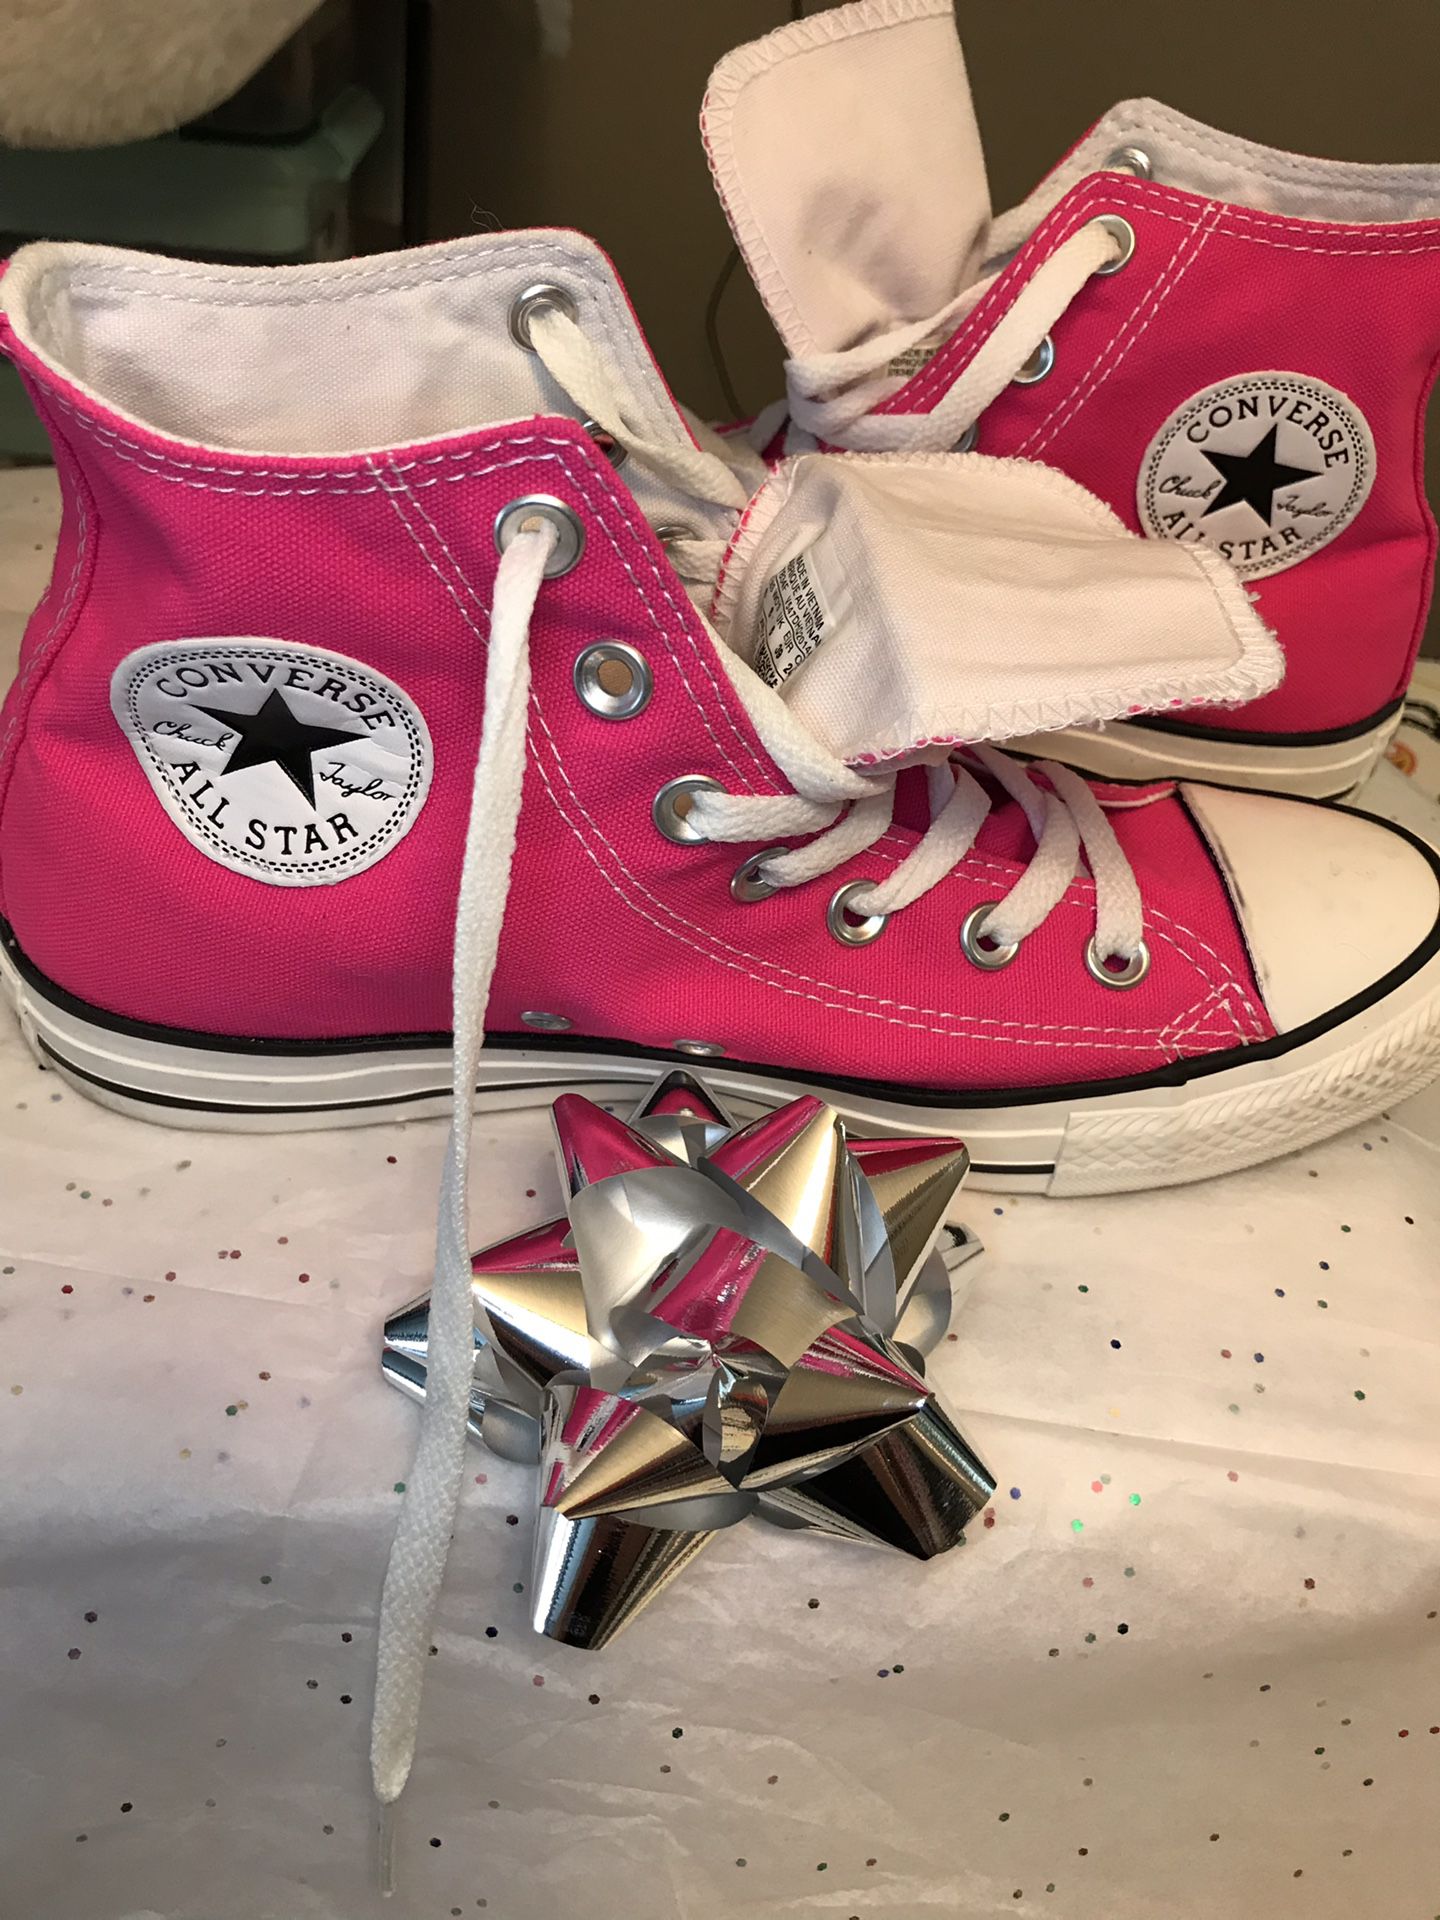 Converse size 8 woman’s 6 Man used 2 times